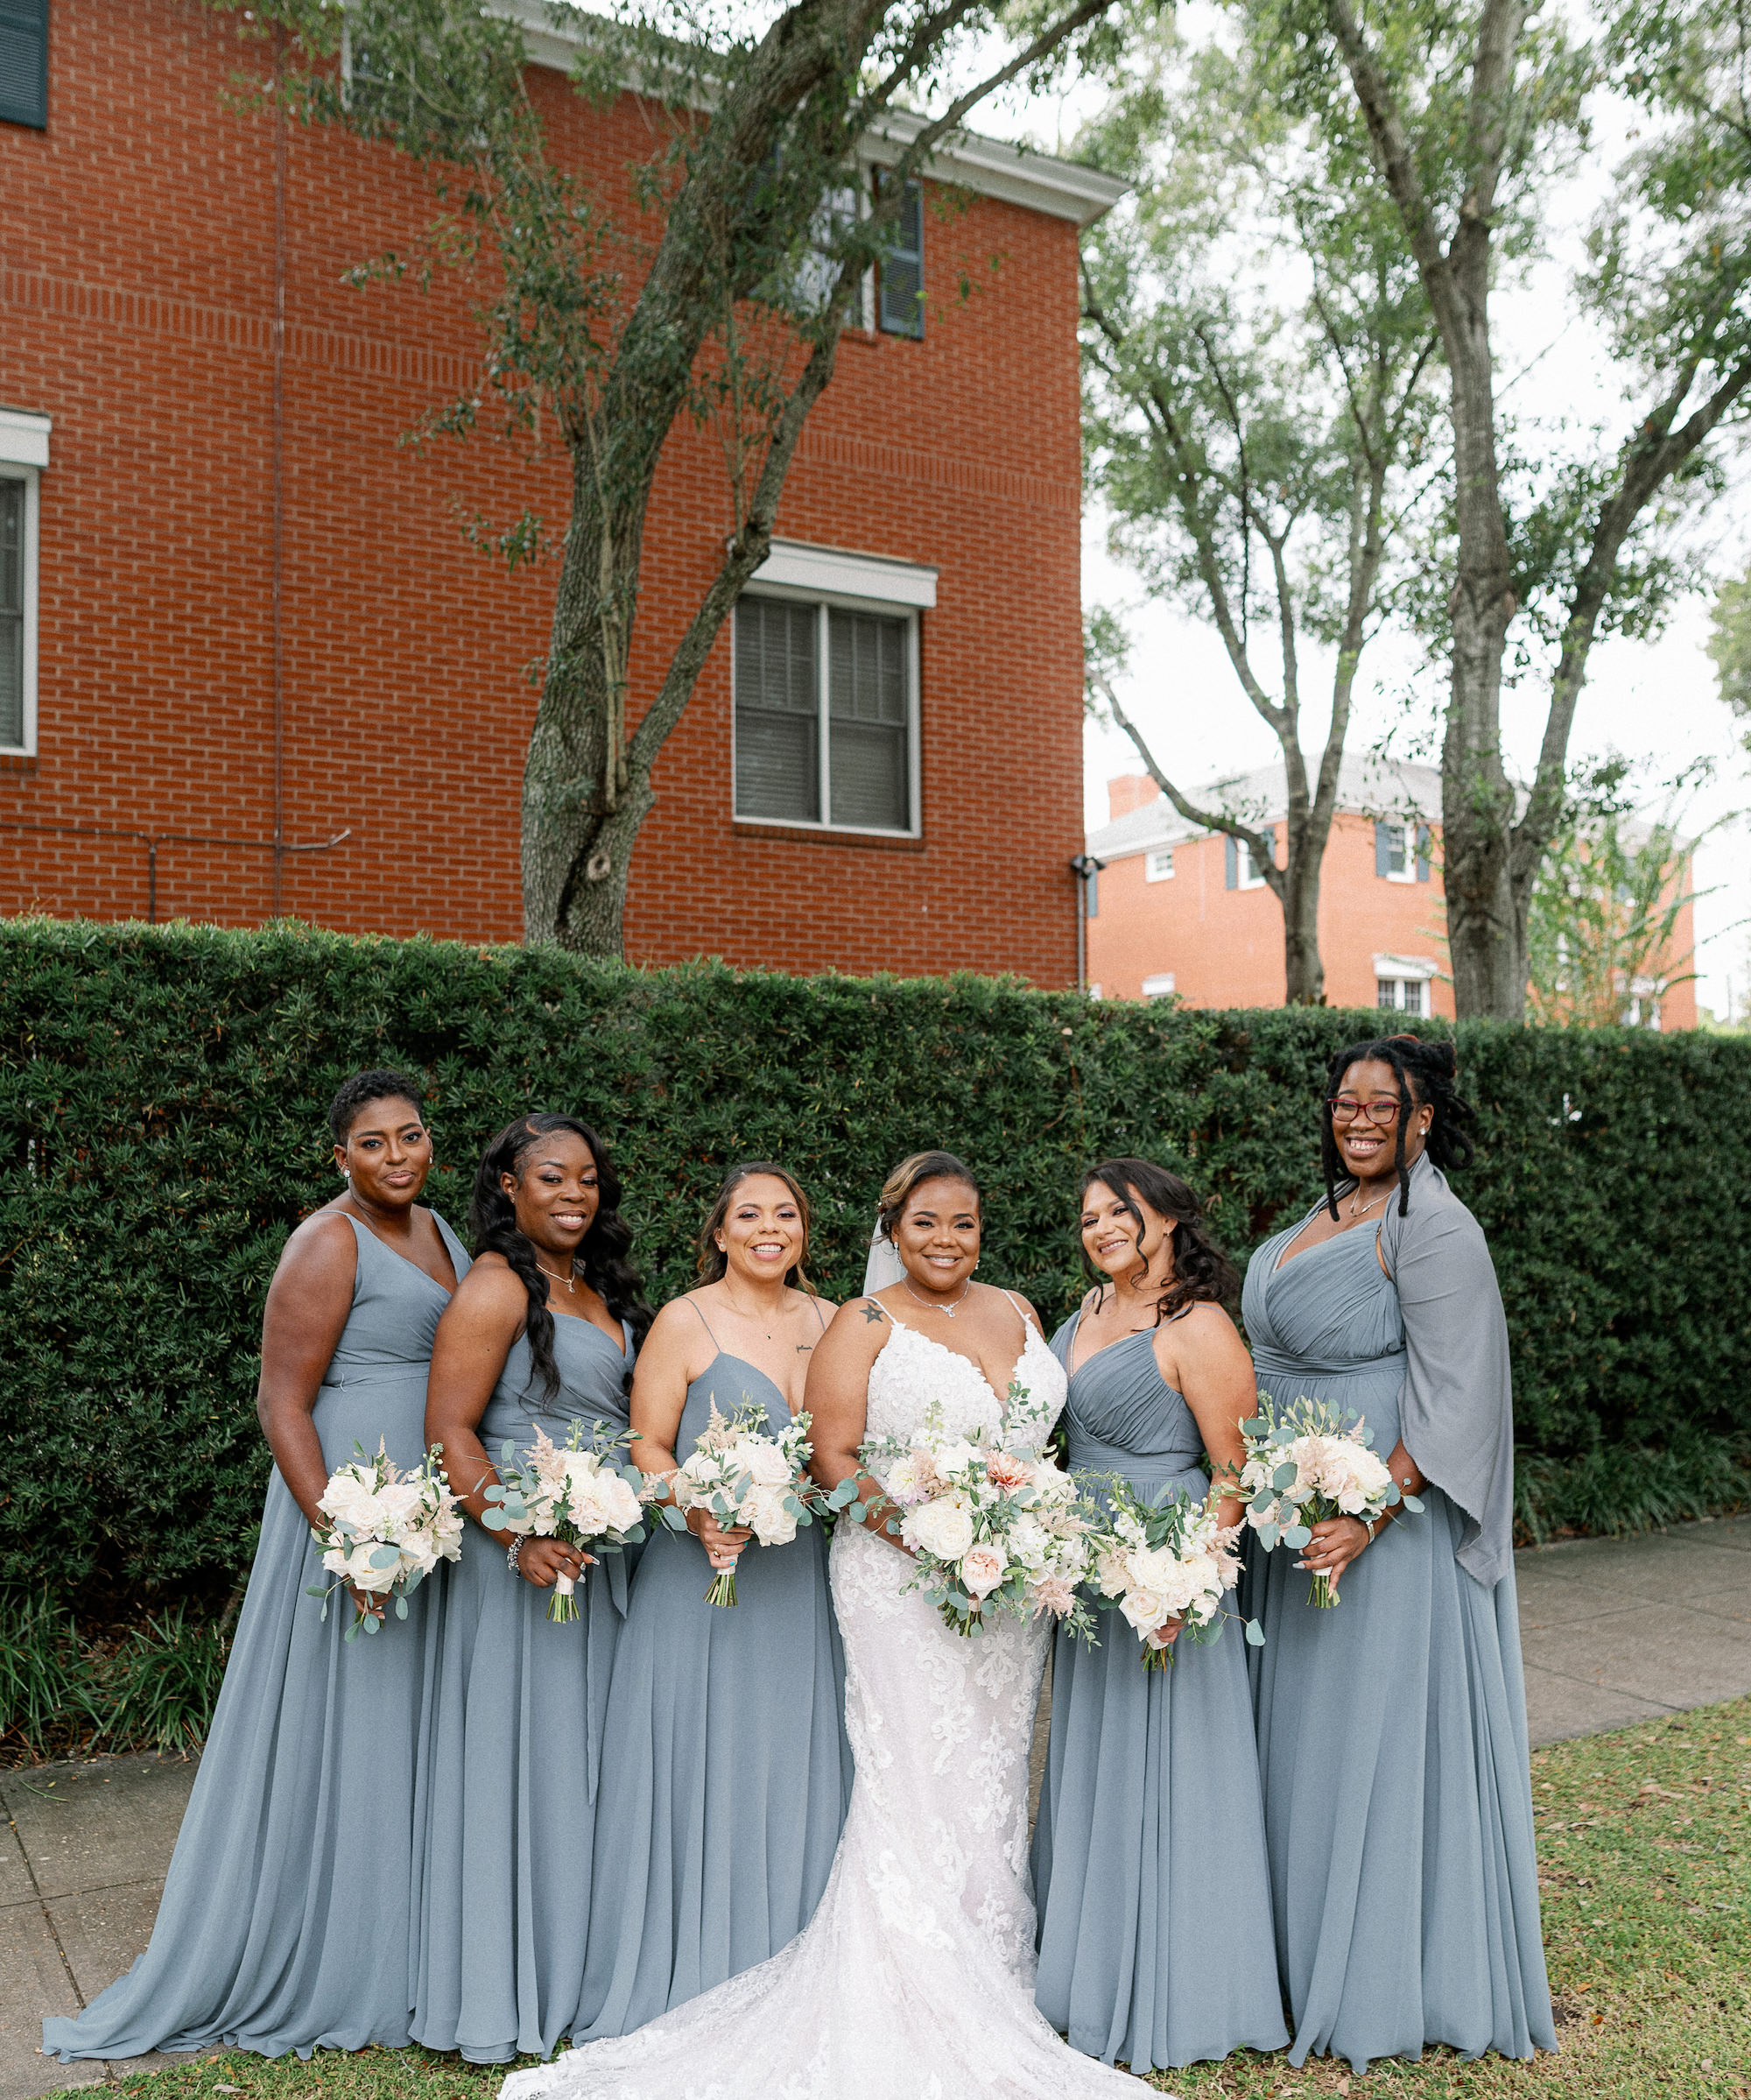 Same Sex Lesbian Wedding, Bride with Bridesmaids Wearing Mix and Match Gray Dresses Holding White and Greenery Floral Bouquets | Tampa Bay Wedding Photographer Dewitt for Love | Wedding Hair and Makeup Imago Dei by Milan